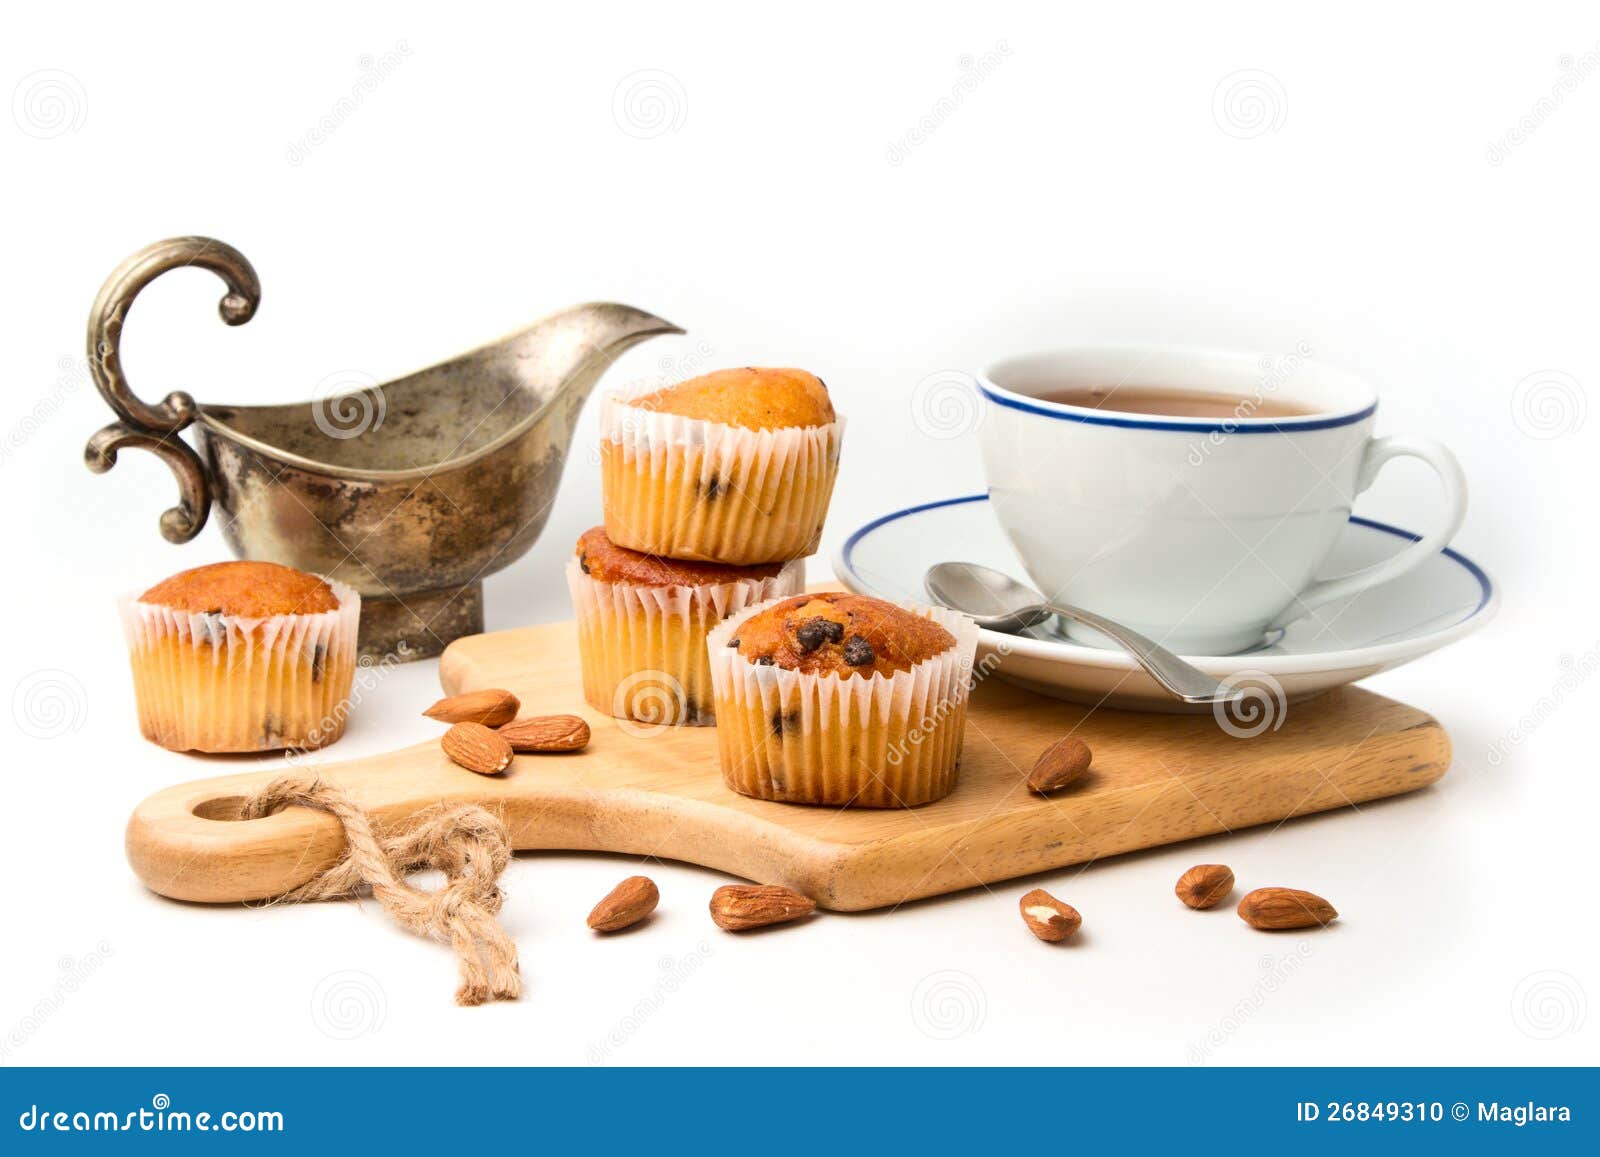 clipart muffins and coffee - photo #19